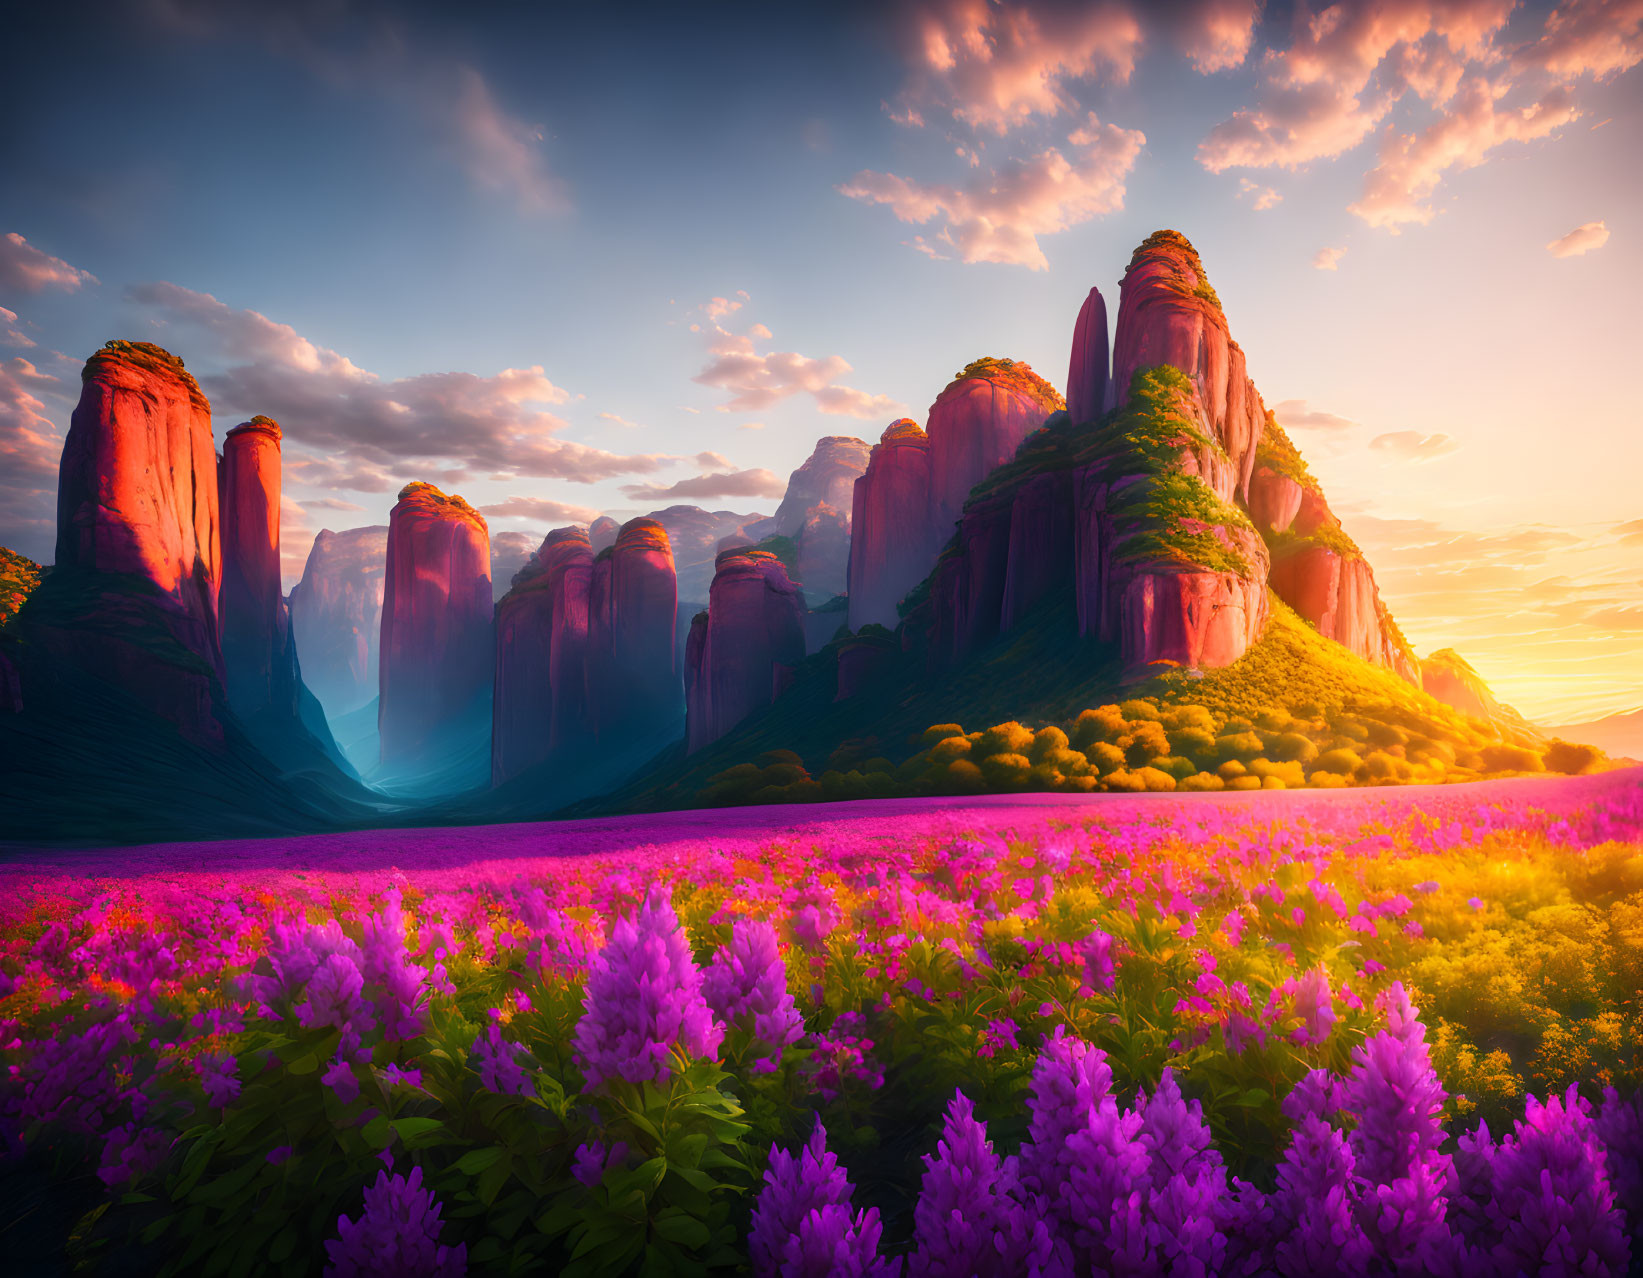 Majestic red rock formations under colorful sunrise sky with vibrant purple wildflowers